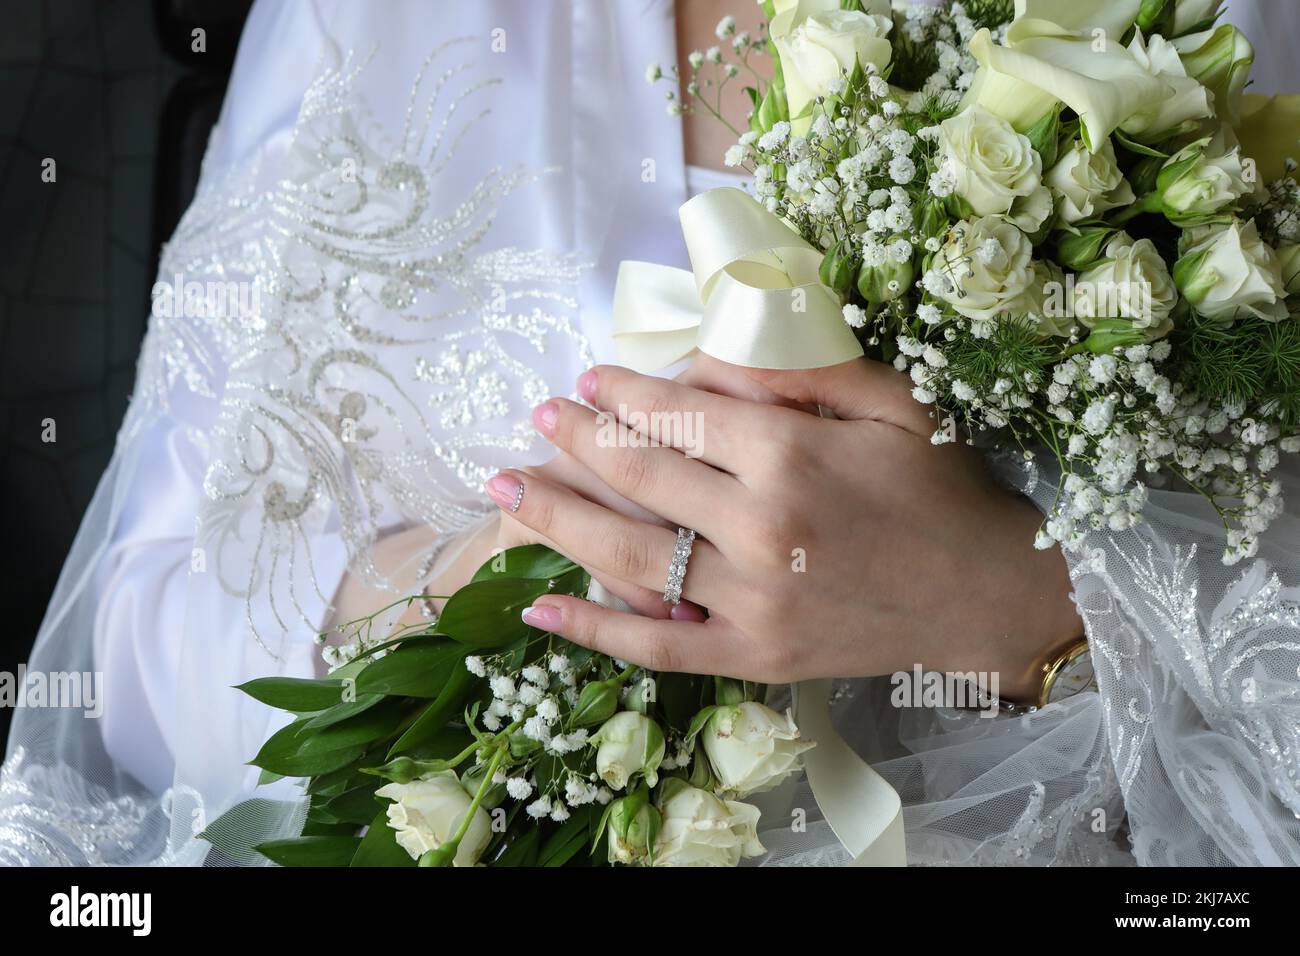 High quality wedding pictures Stock Photo